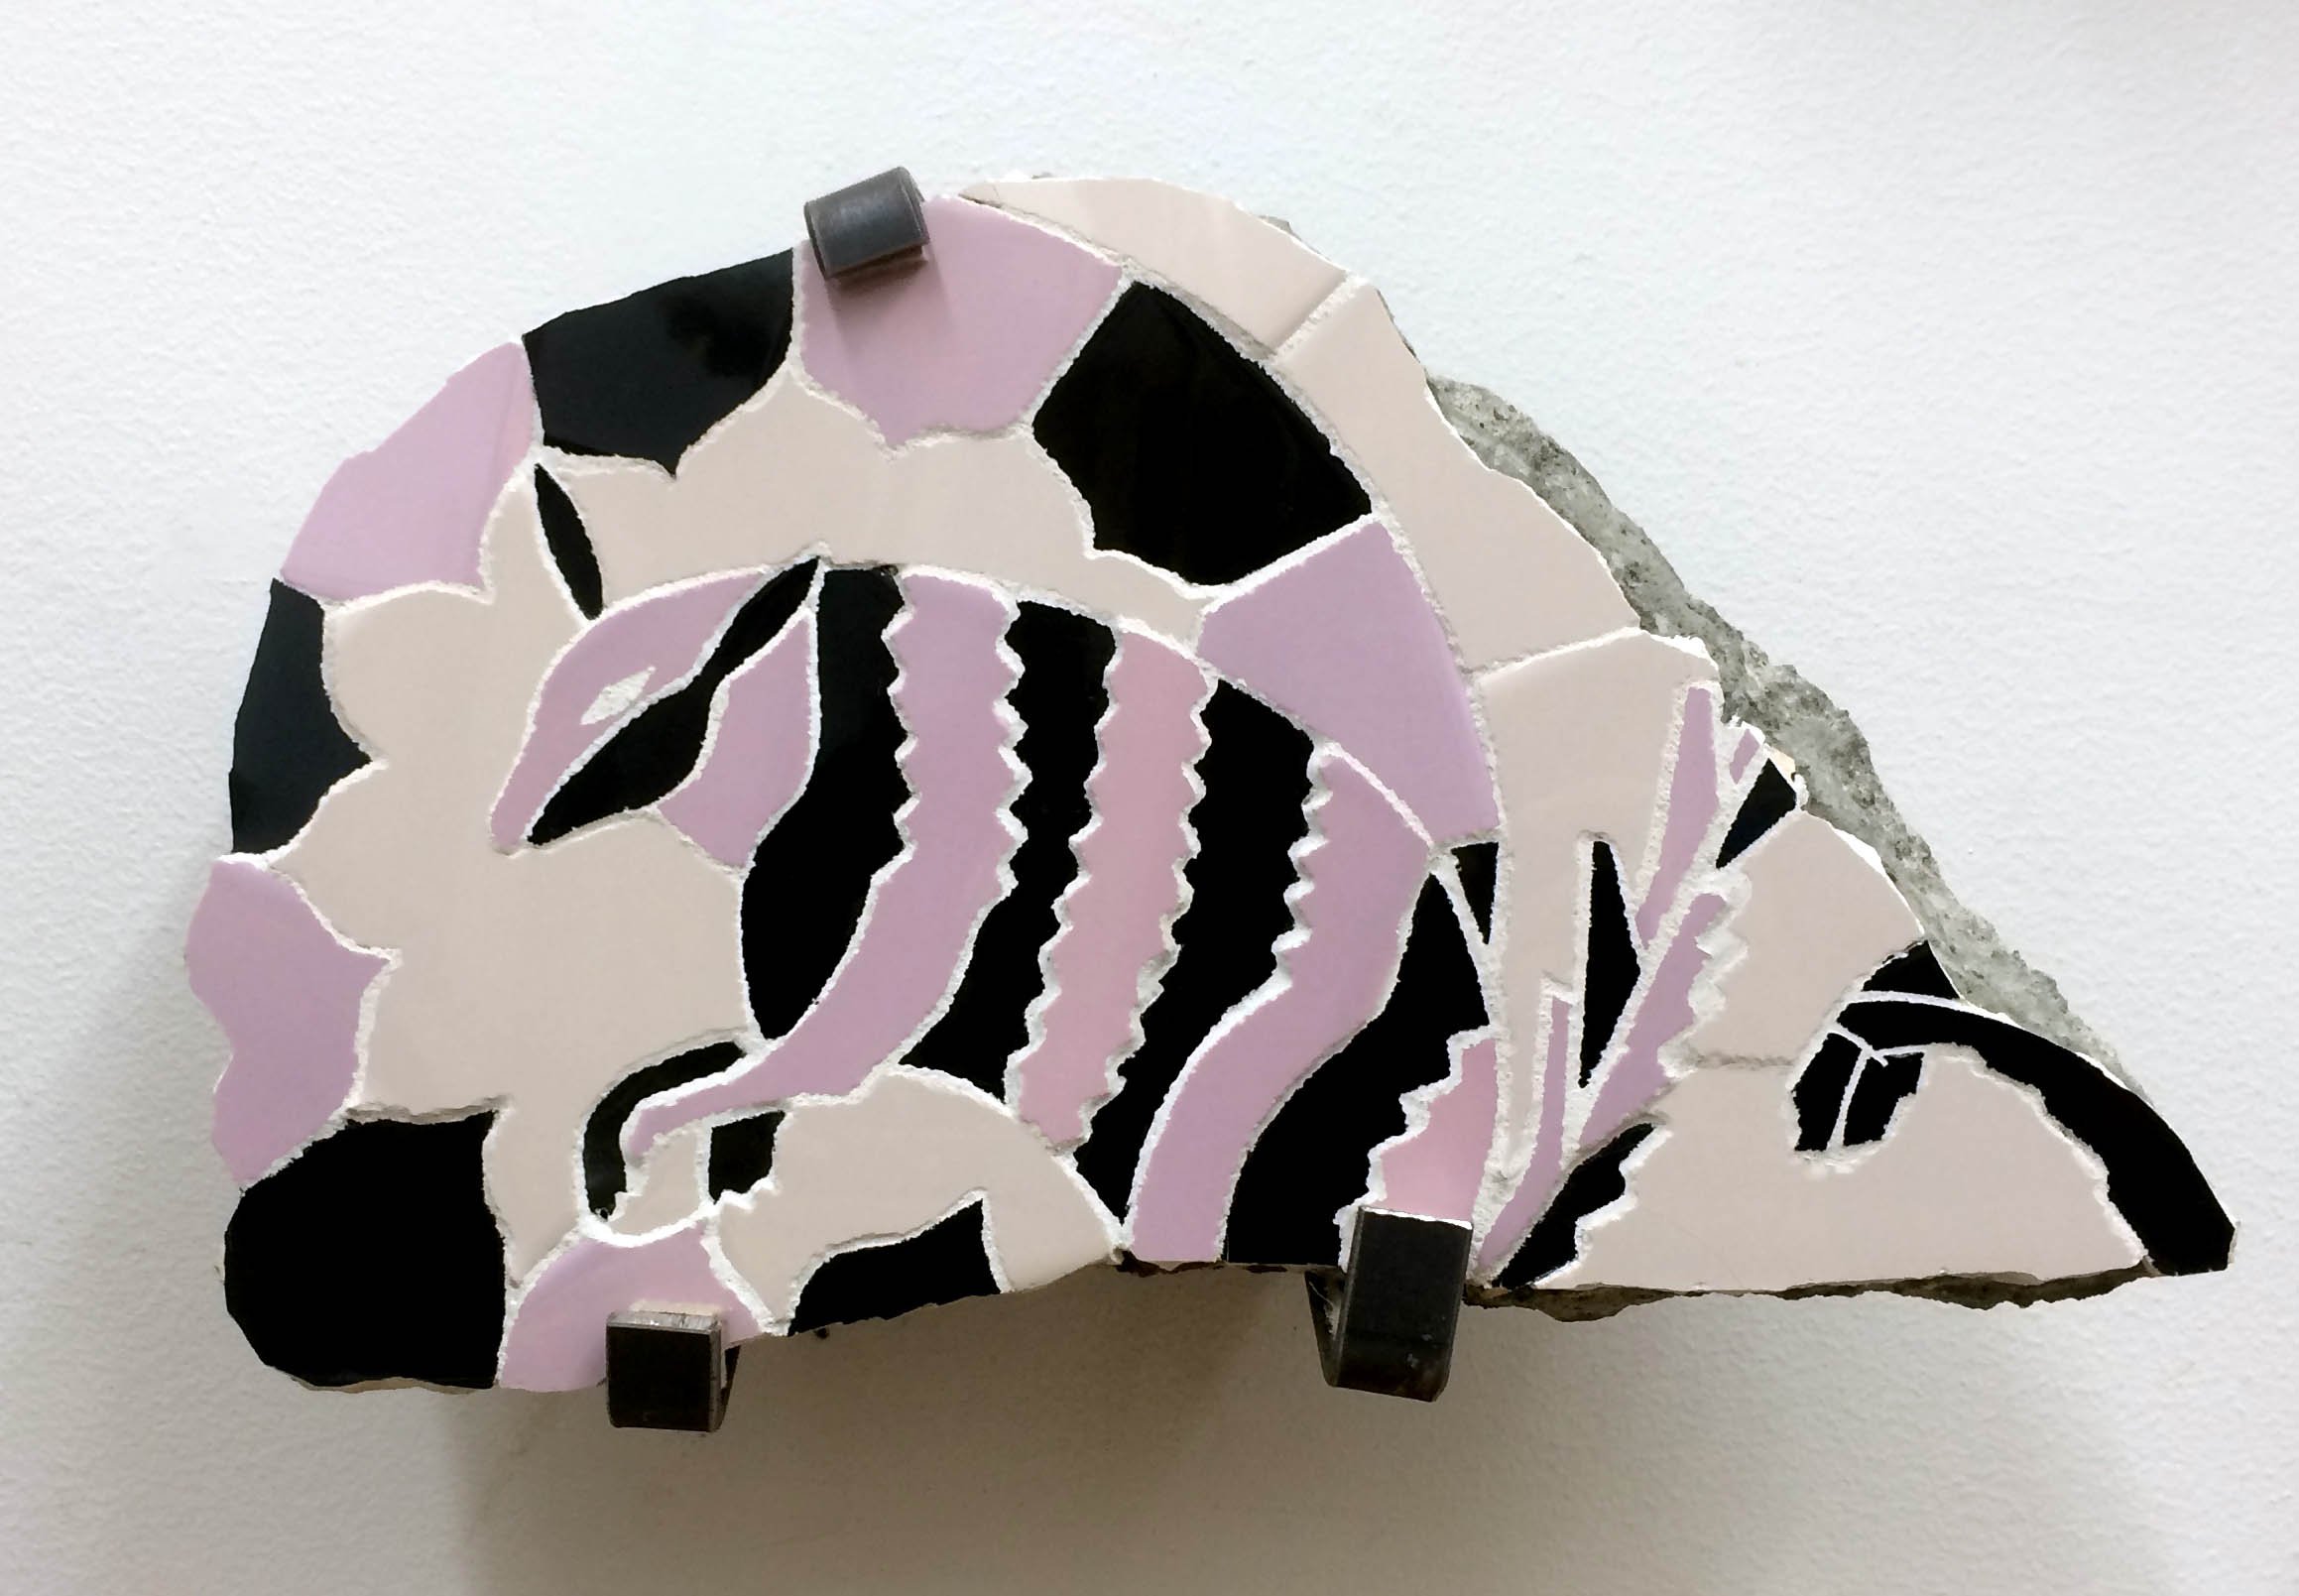 Joe Bochynski, <em>Armadillo in Pink and Black Surrounded by Flower Petals, 2016.16. Excavated from condo development at 476 Woodward Ave. Ridgewood, NY. Possibly from the Otomi people</em>. Courtesy of Joe Bochynski.